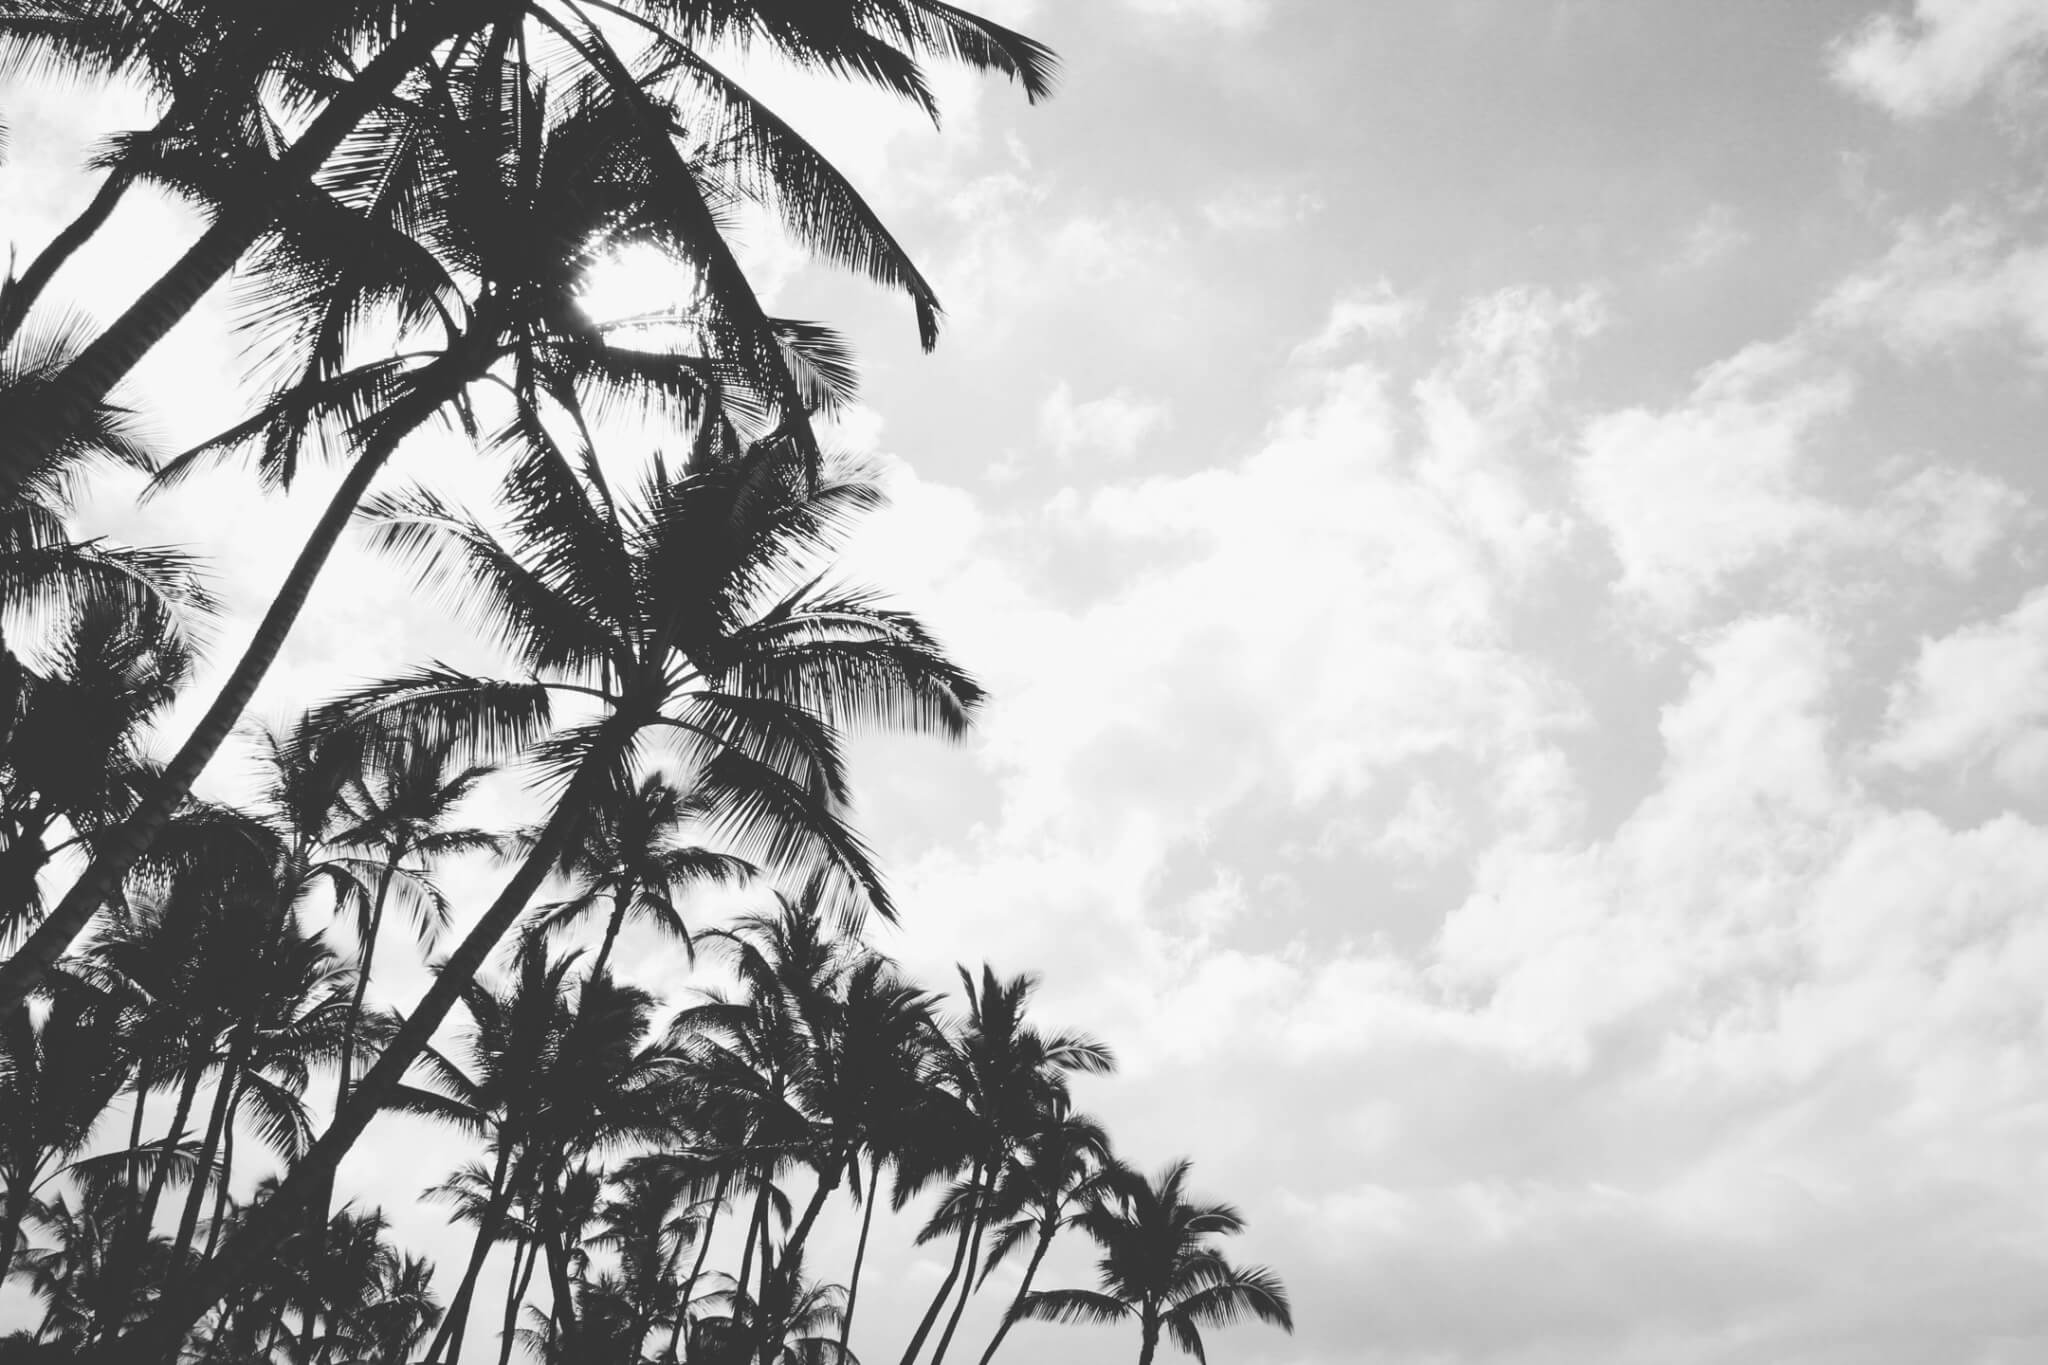 Black & white palm tree silhouettes taken in Maui, Hawaii | Uno Dos Trae travel photography